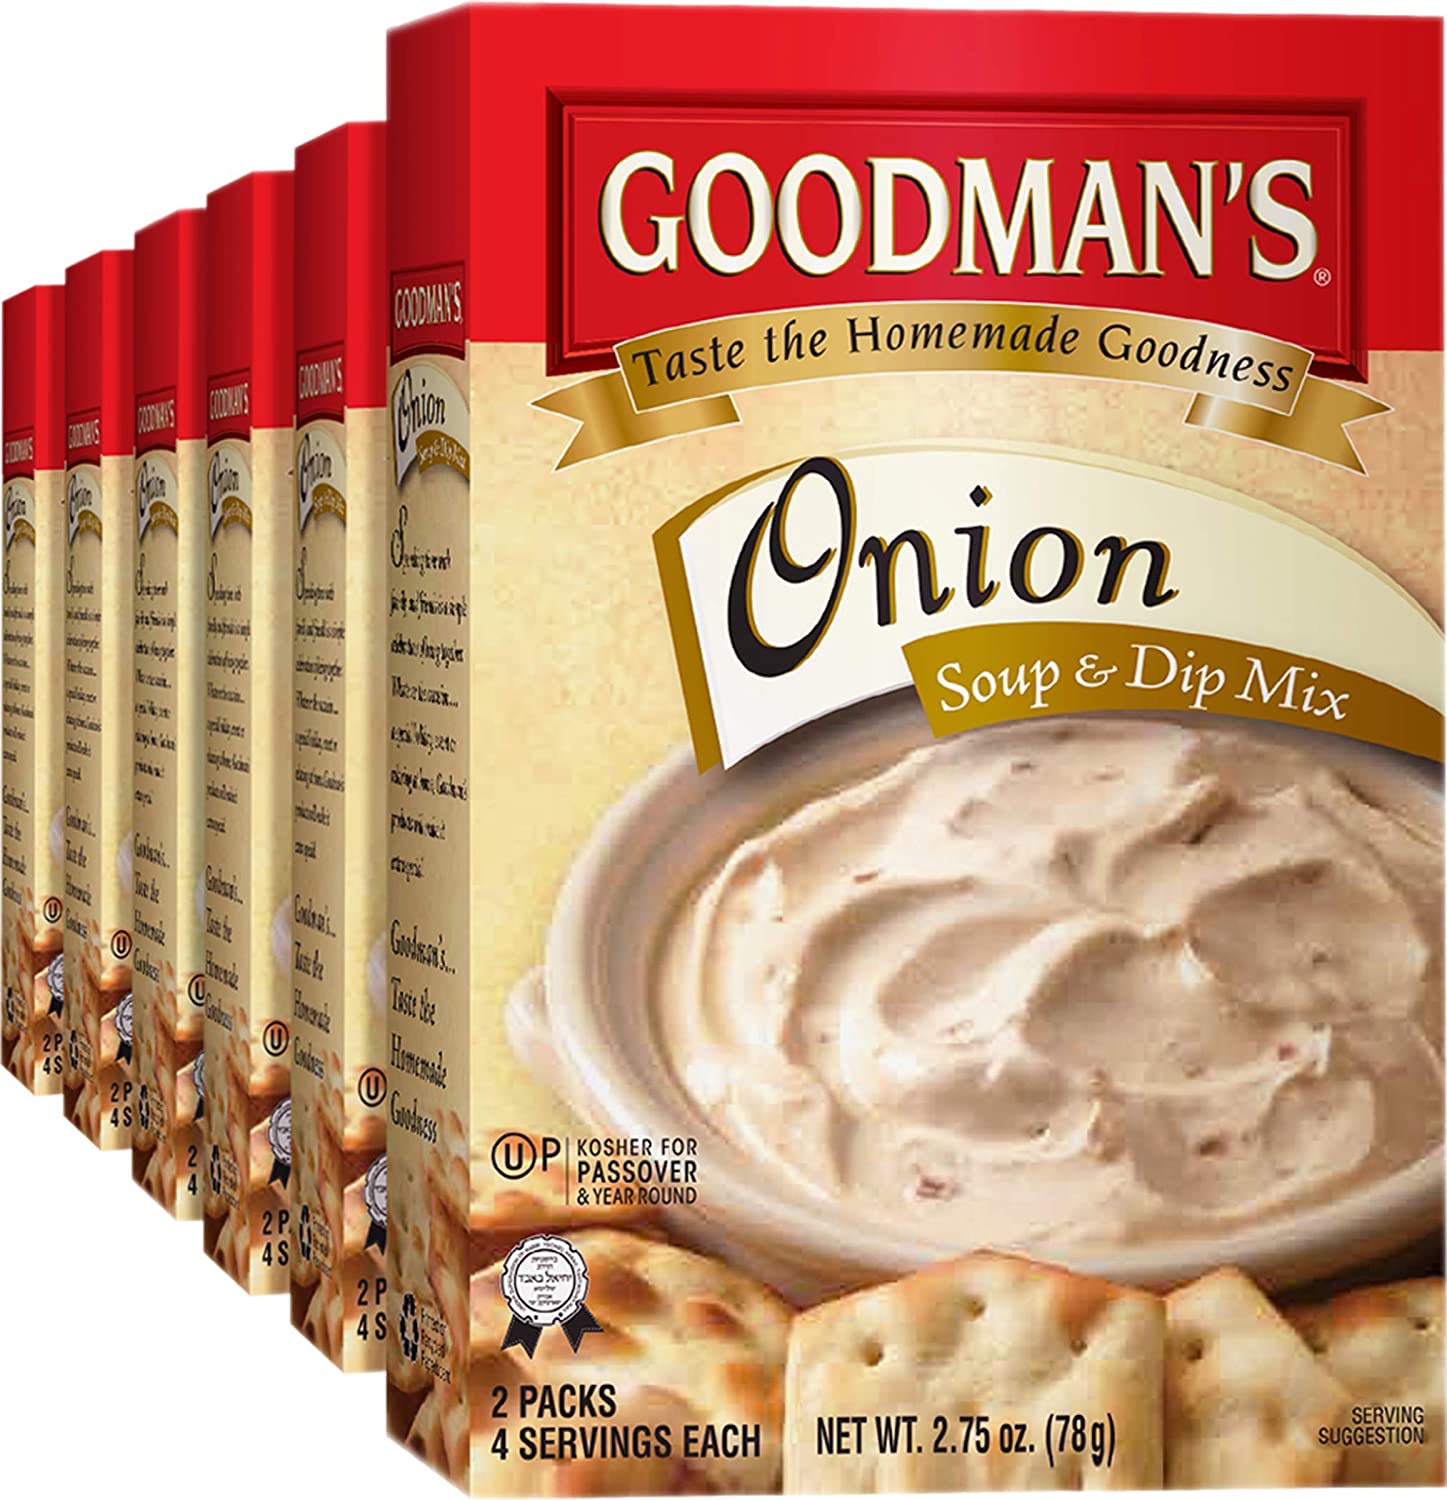 Goodman’s Onion Soup & Dip Mix Kosher For Passover 2.75 oz. Pack of 6.